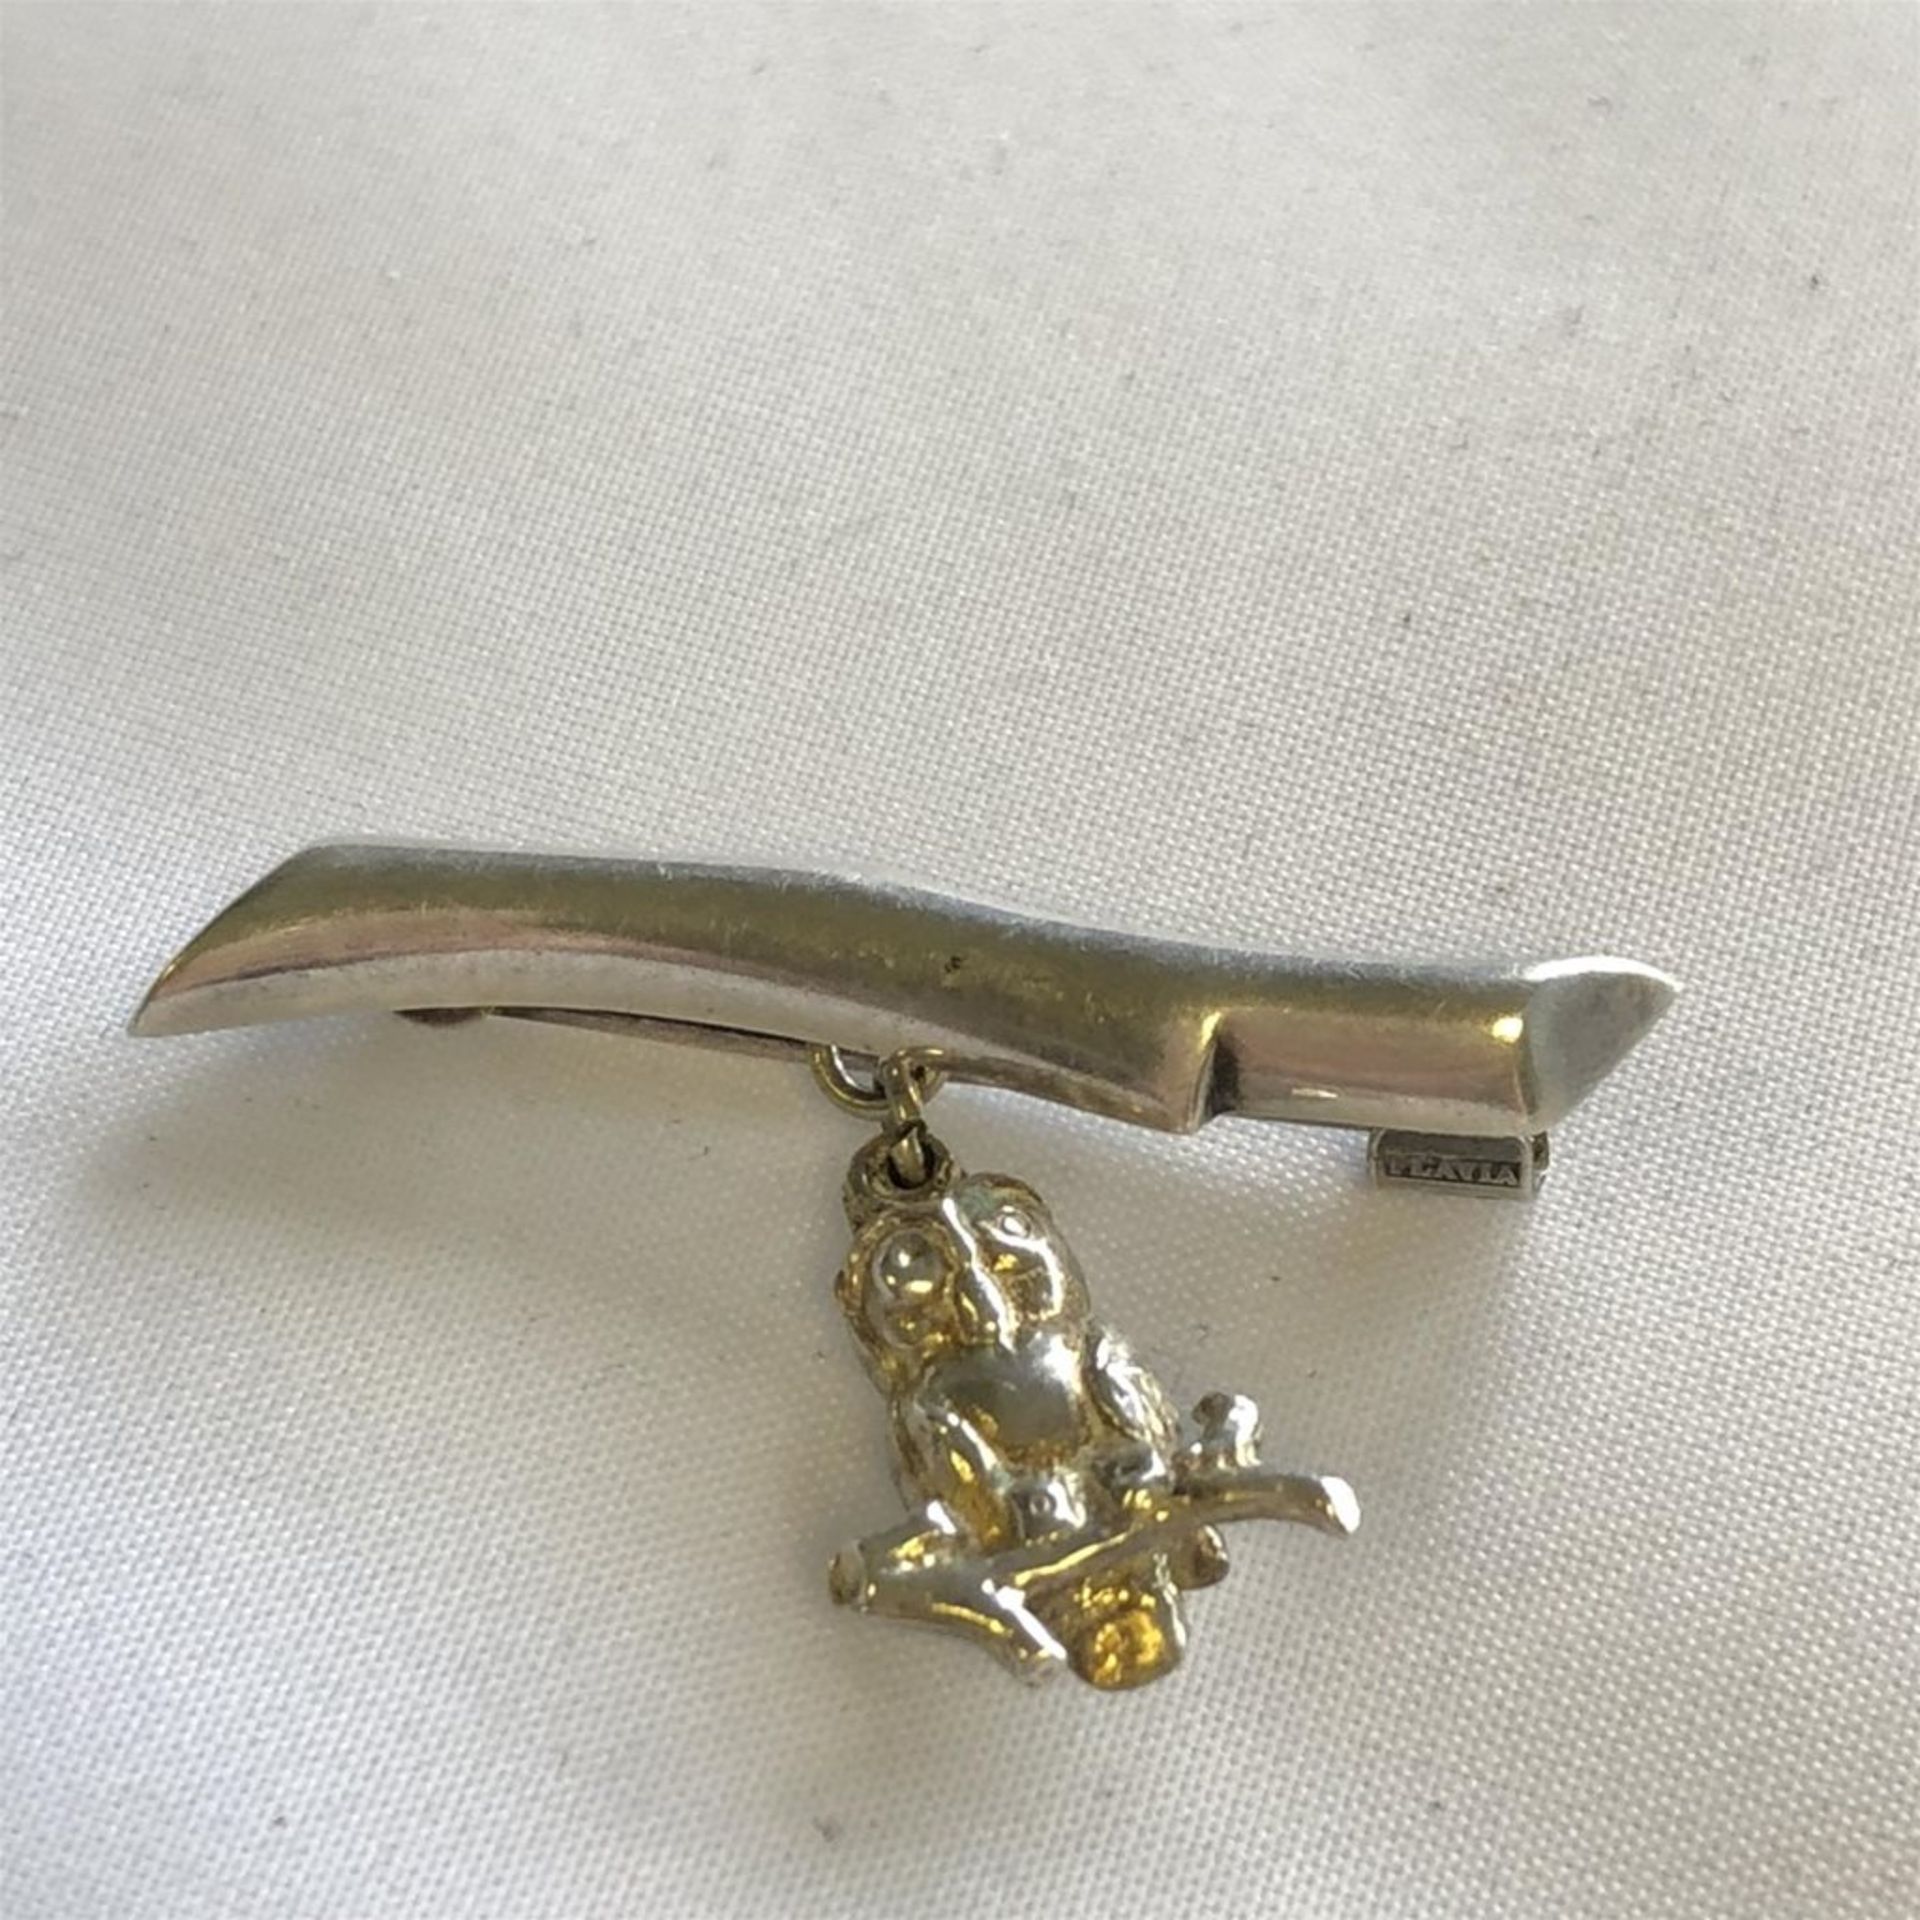 Silver branch brooch with owl charm - Sweden